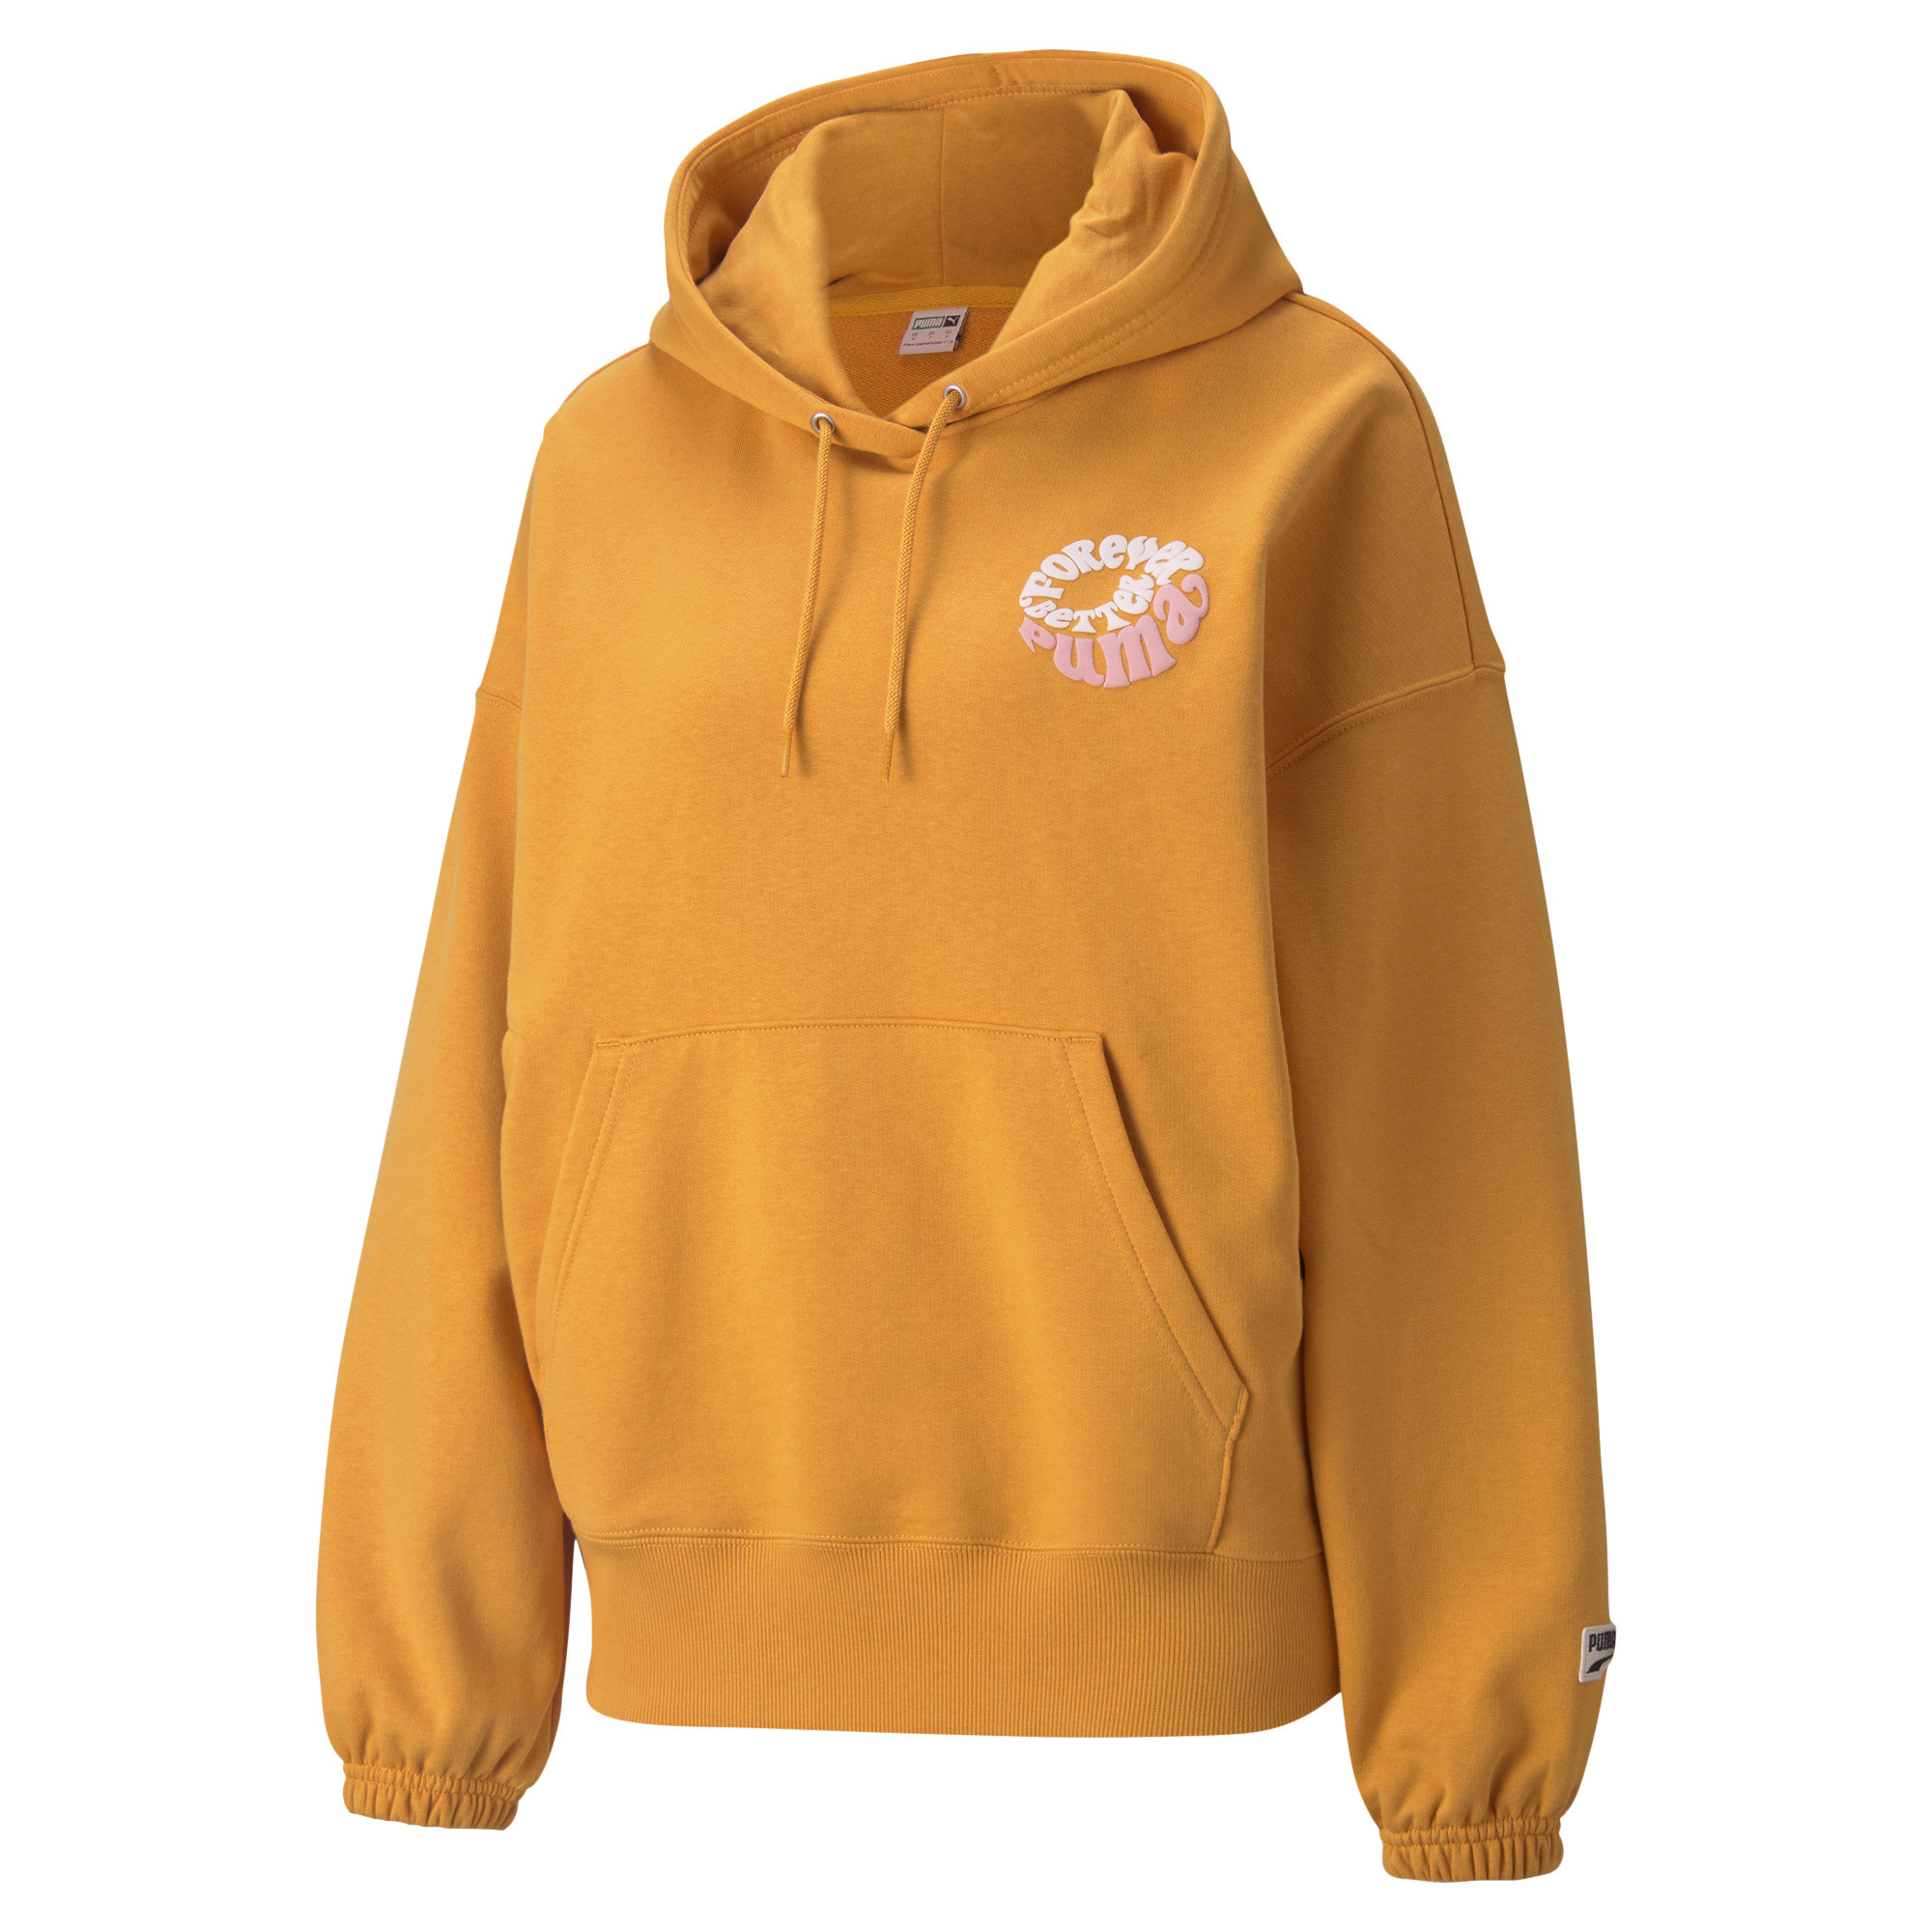 Downtown Graphic Hoodie, Yellow, large image number 0